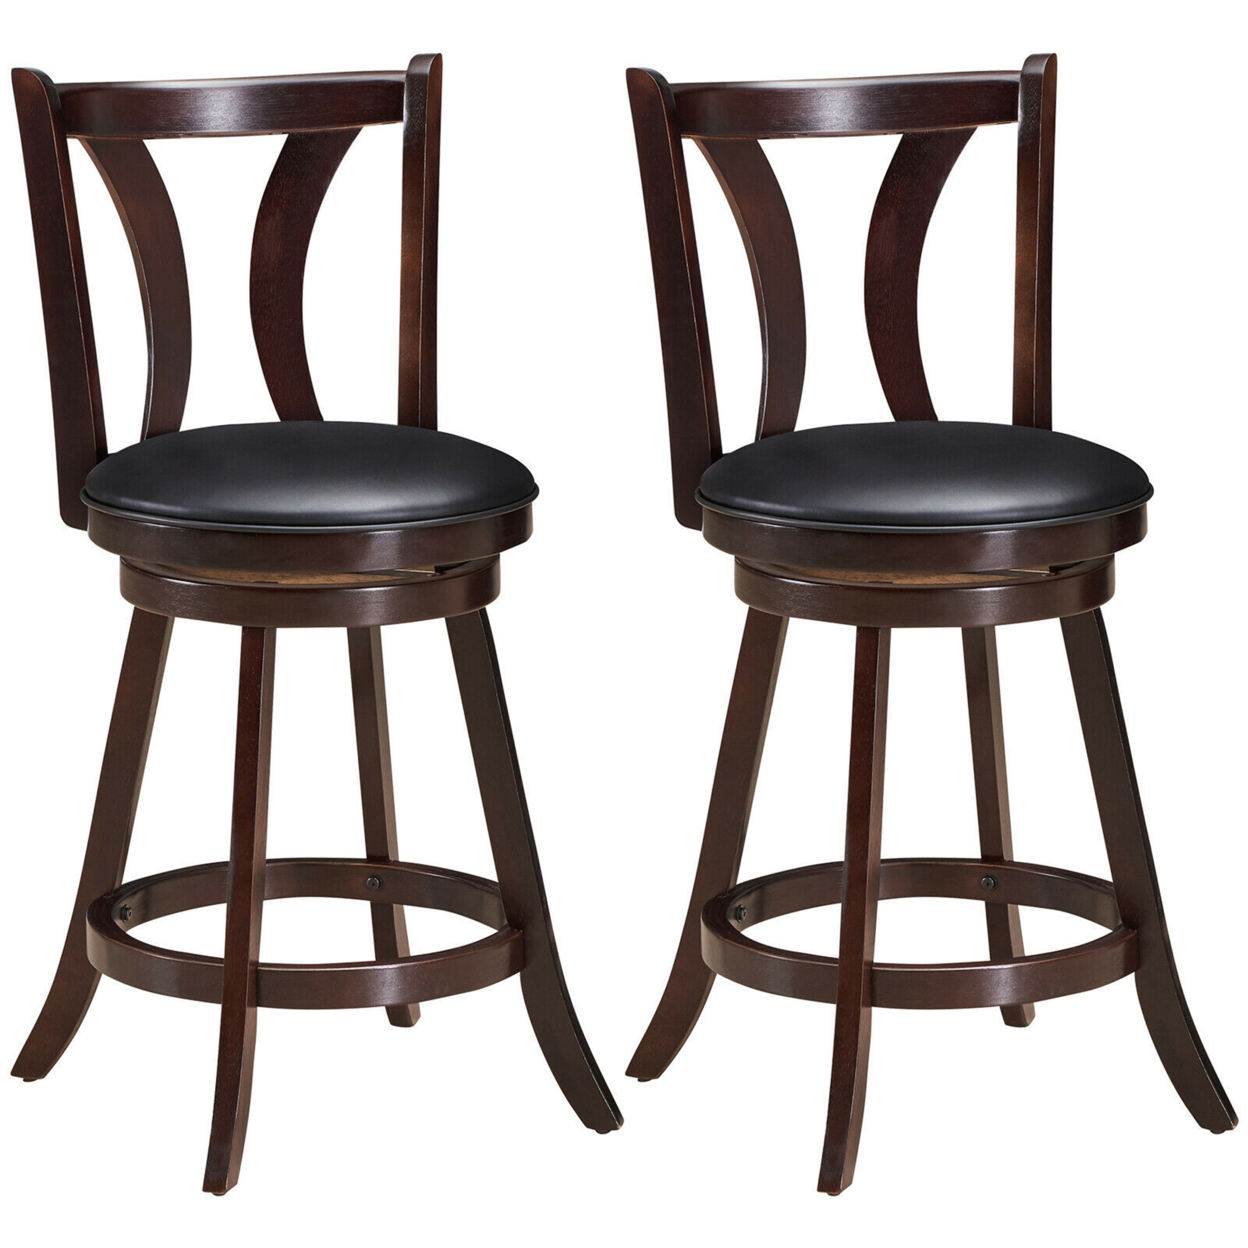 Gymax Set of 2 Swivel Bar stool 24 Counter Height Leather Padded Dining Kitchen Chair